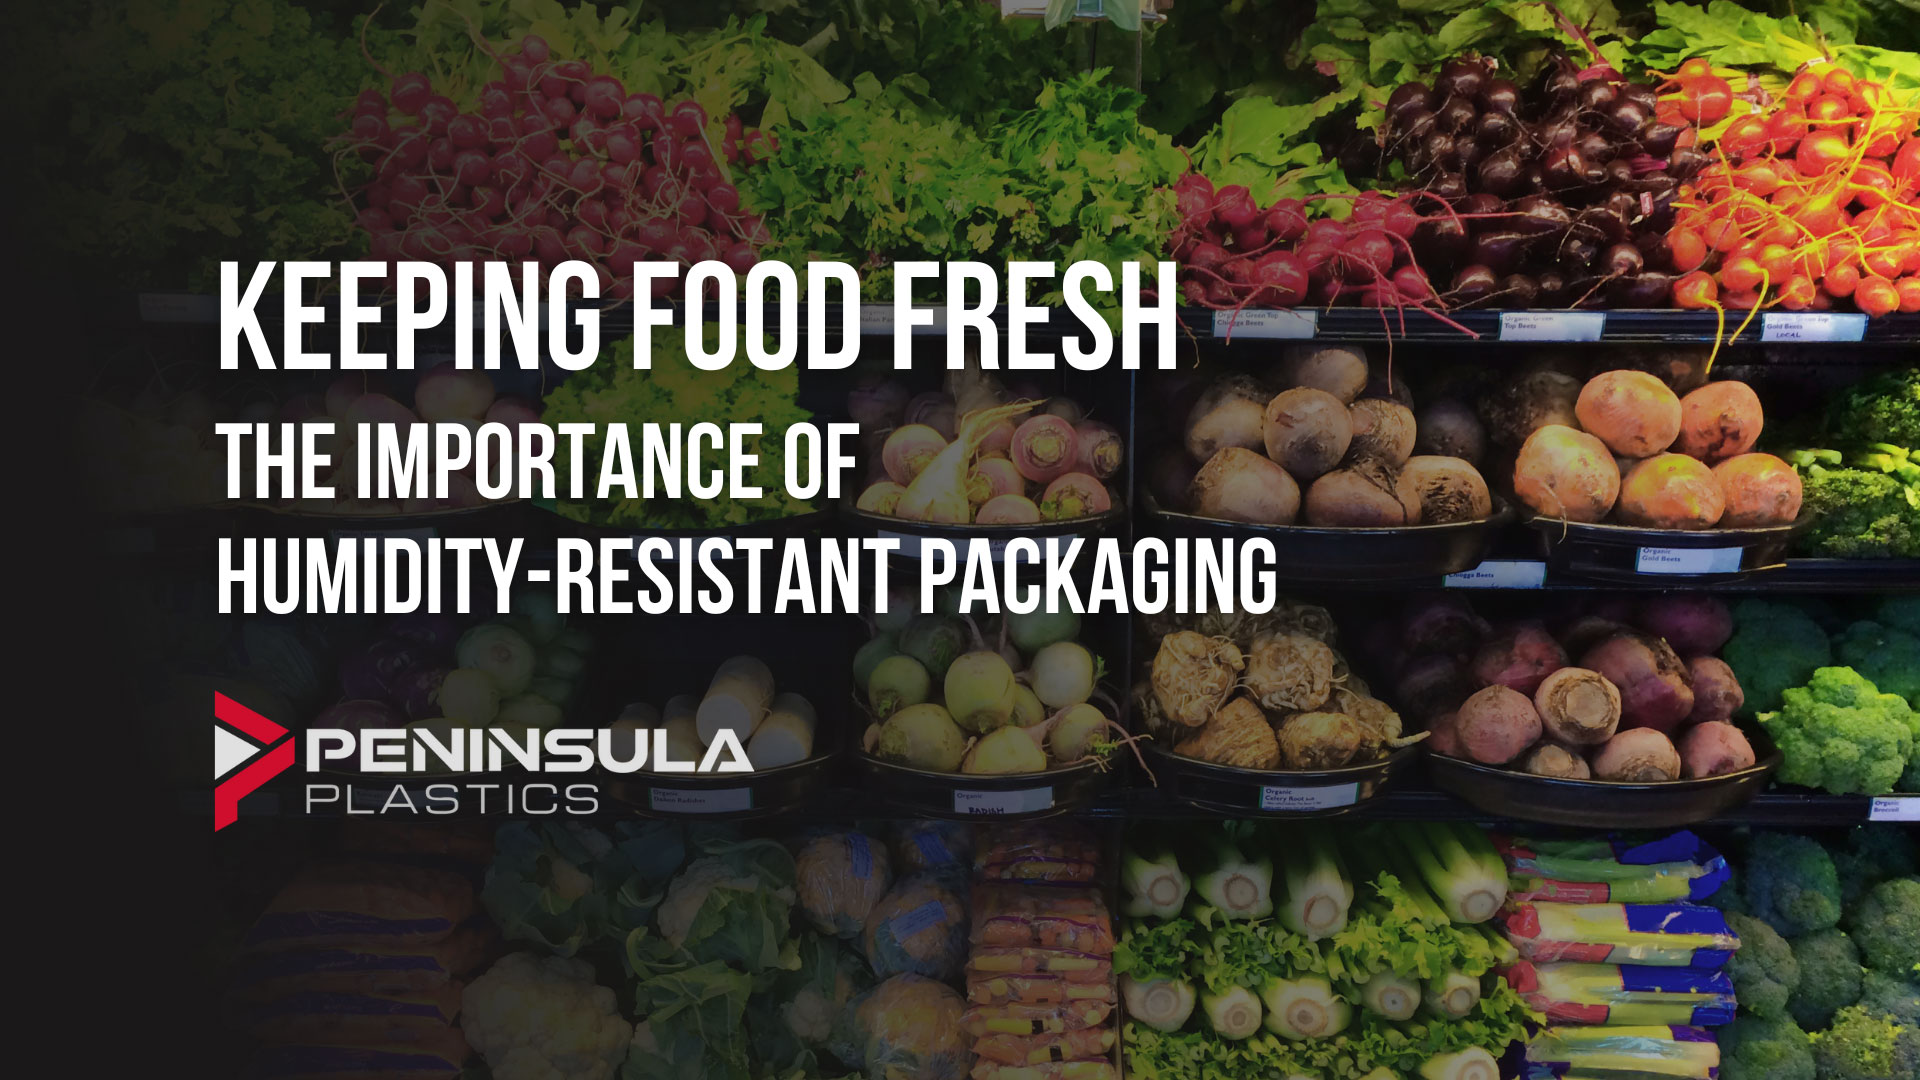 Keeping Food Fresh With Humidity-Resistant Packaging